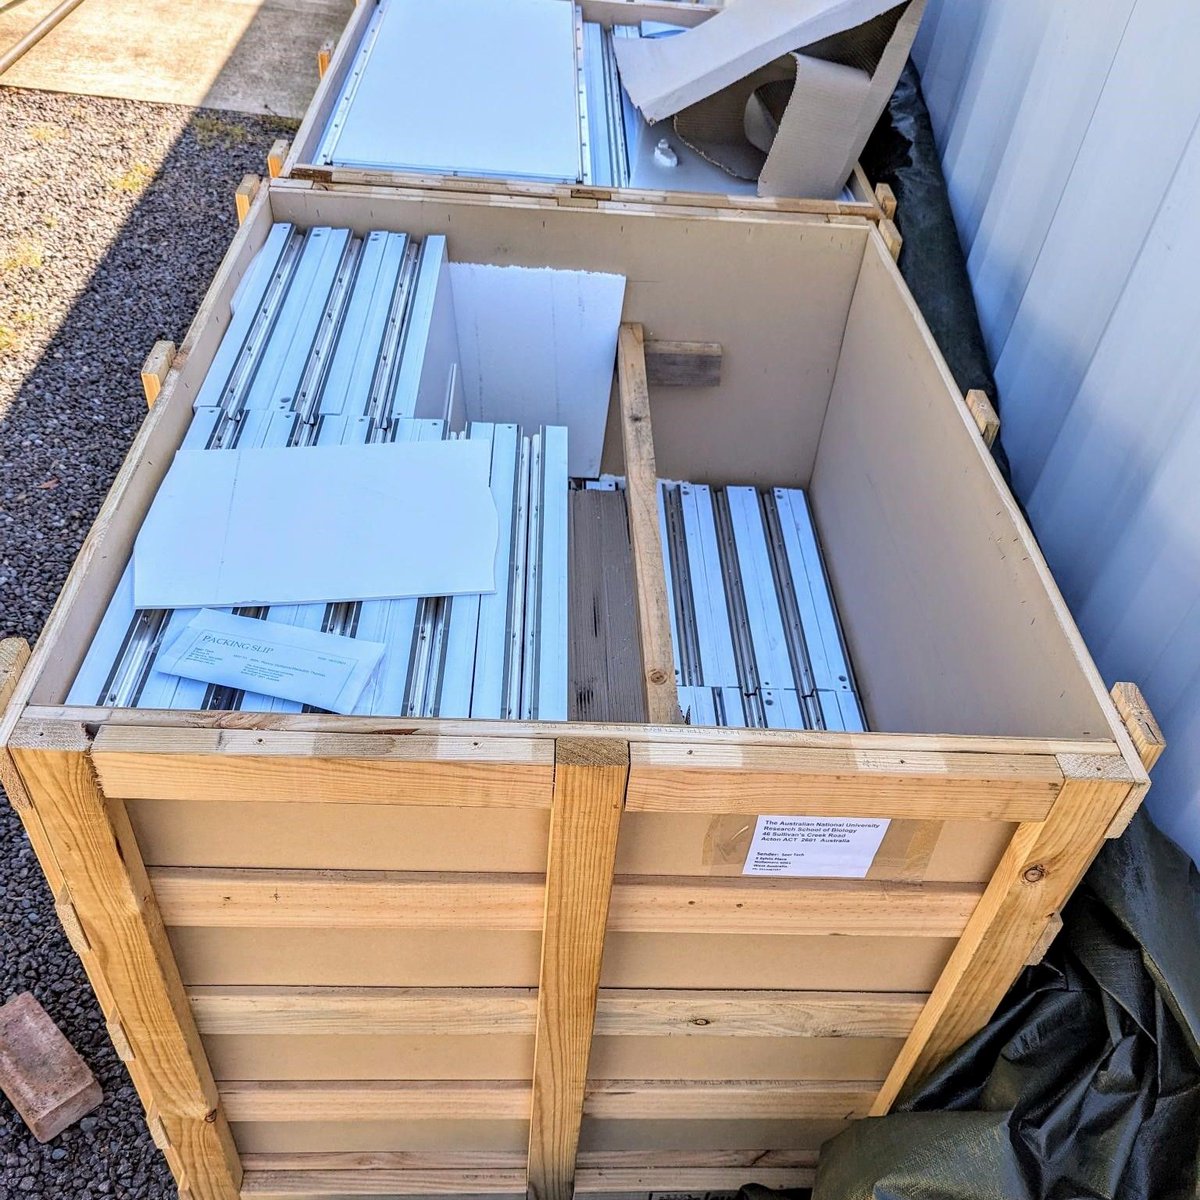 The APPF-ANU team is working with the Bentley Lab to unload & then test 50 new large (50x120x2 cm) and 50 new small (50x60x2 cm) rhizoboxes. These facilitate high-res imaging & collection of exudates from individual root systems up to 120cm deep in a controlled environment.